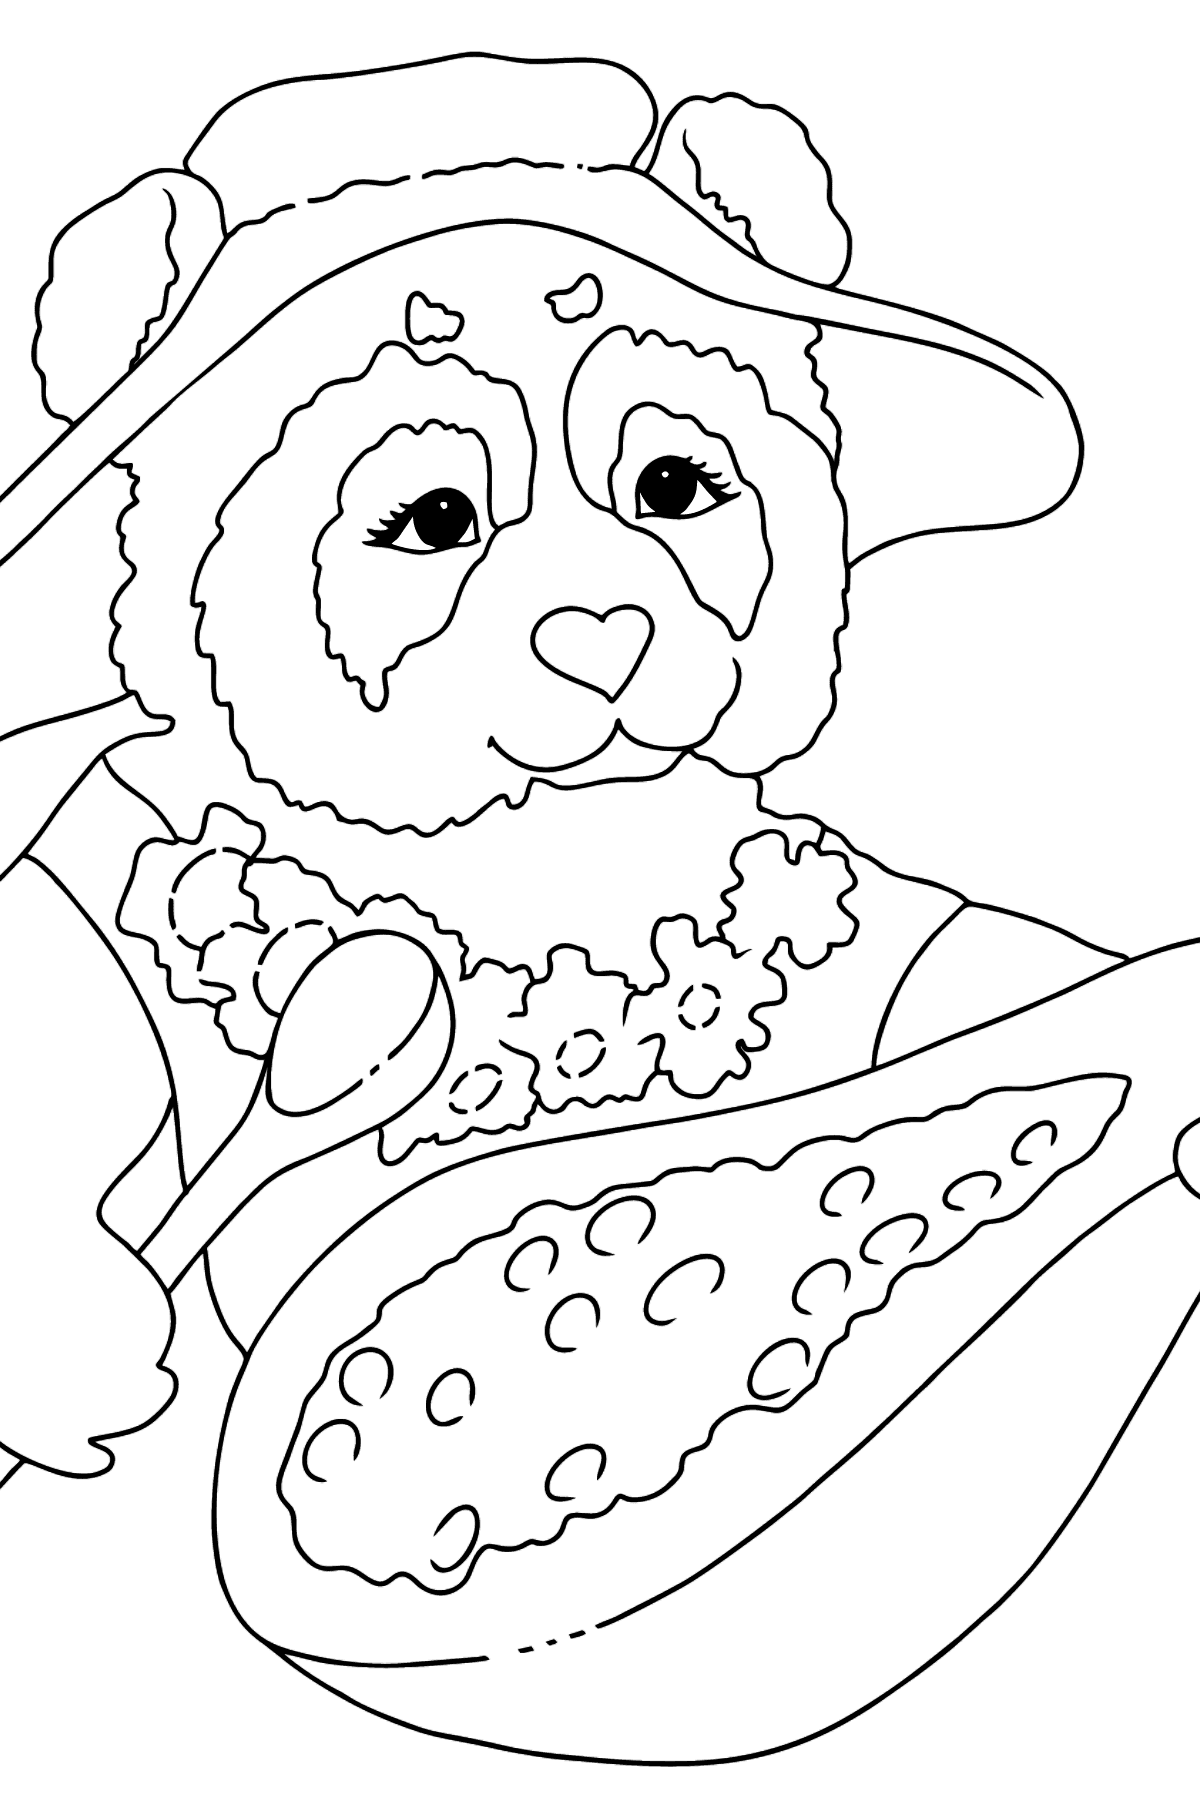 Cute Panda (Simple) coloring page - Coloring Pages for Kids